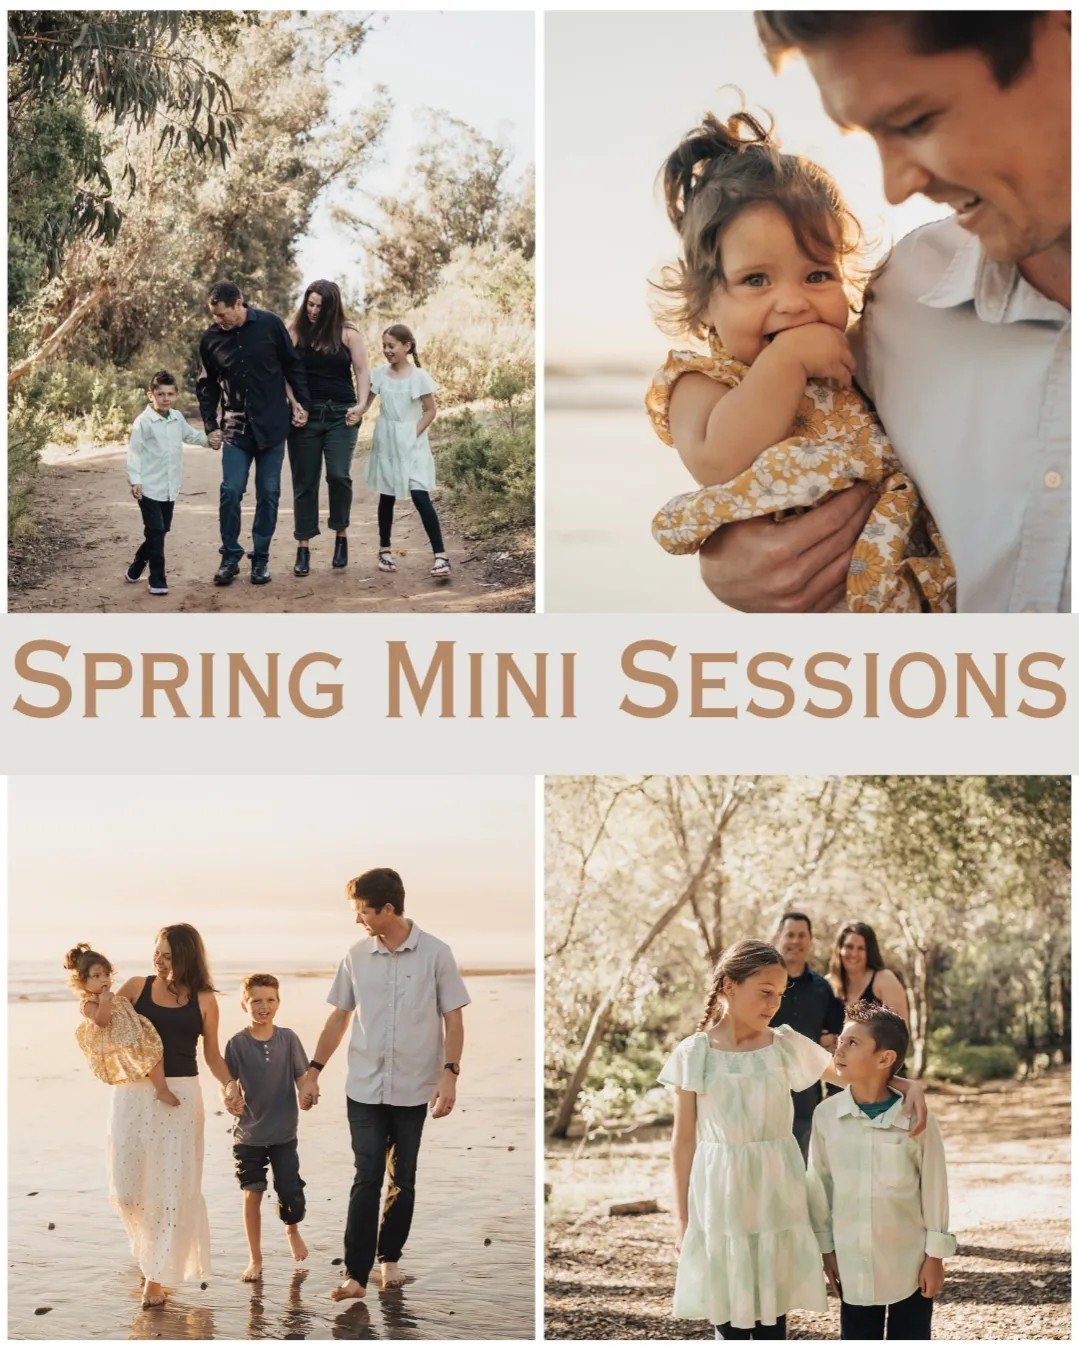 Hi friends! This spring, I'm so excited to offer mini-sessions on May 19, 2024. And this year, I'm doing things a little differently! 

First, these are open to anyone! Family, couple, portrait, maternity - everyone is welcome to join in on the fun. 